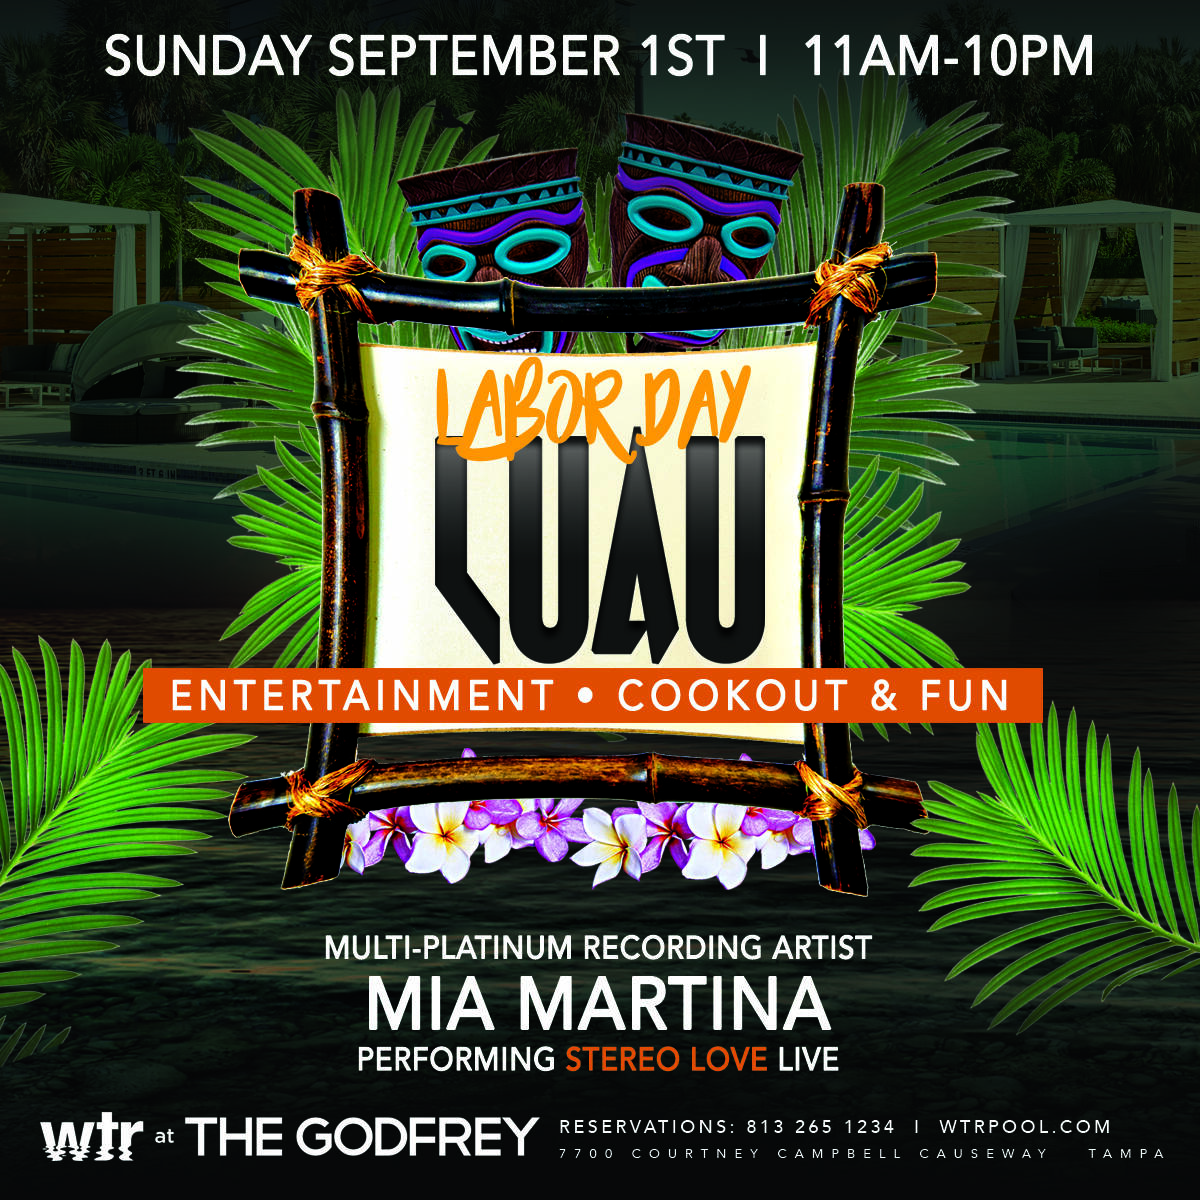 Godfrey Hotel & Cabanas and WTR Pool Grill Bring the Heat this Labor Day Weekend